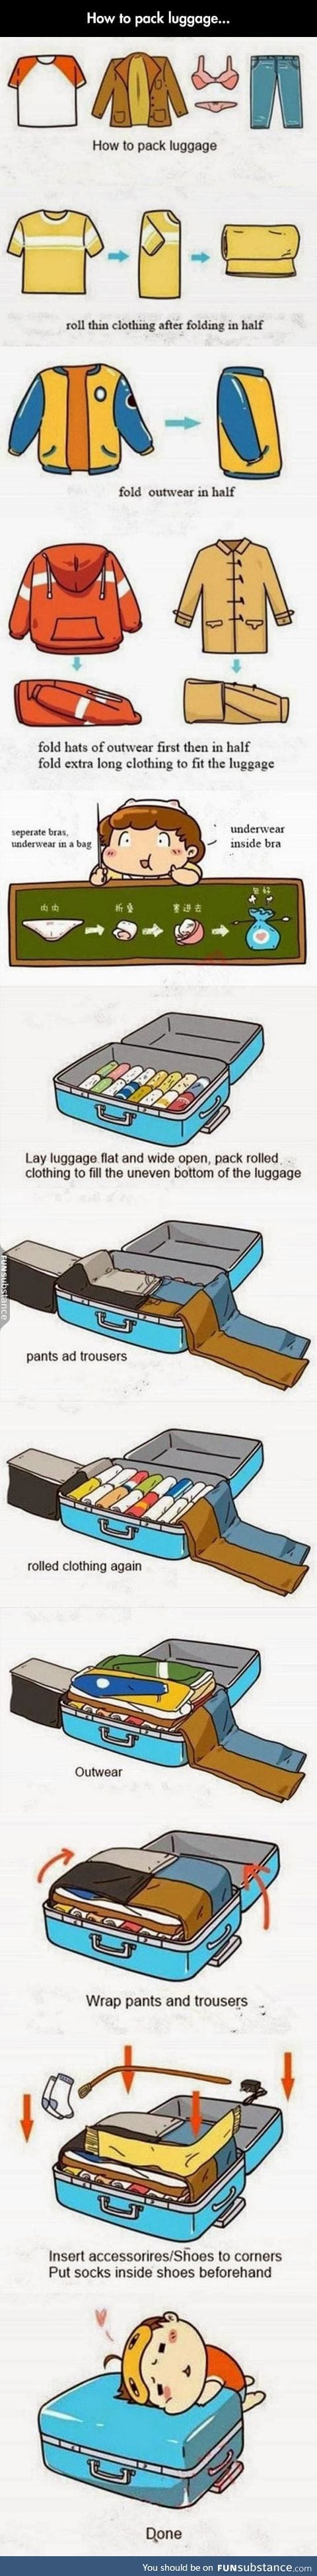 Learn how to pack luggage properly